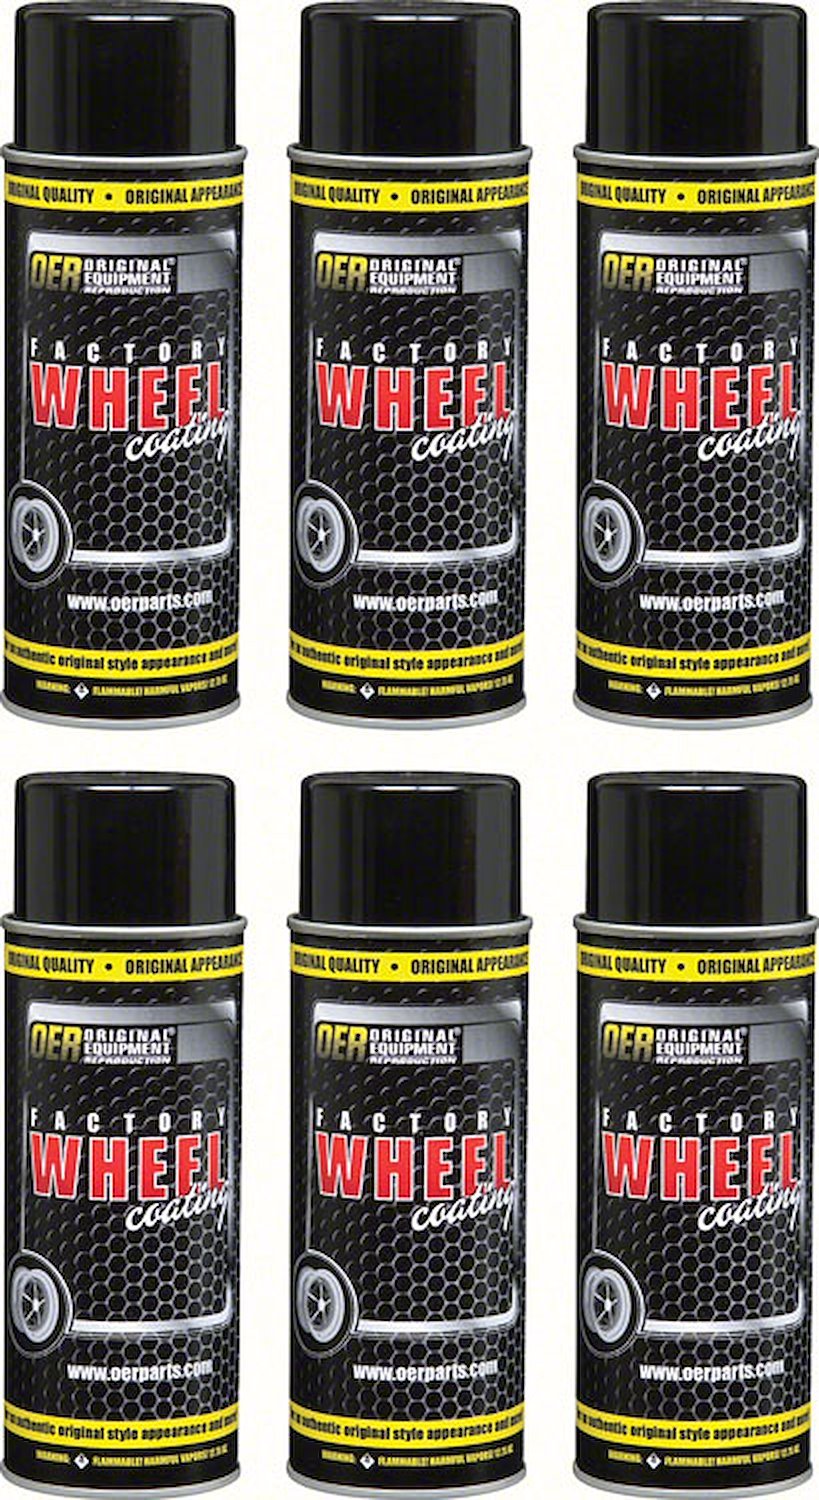 K89316 Wheel Paint Simulated Magnesium OER "Factory Wheel Coating" Case of 6-16 Oz Cans